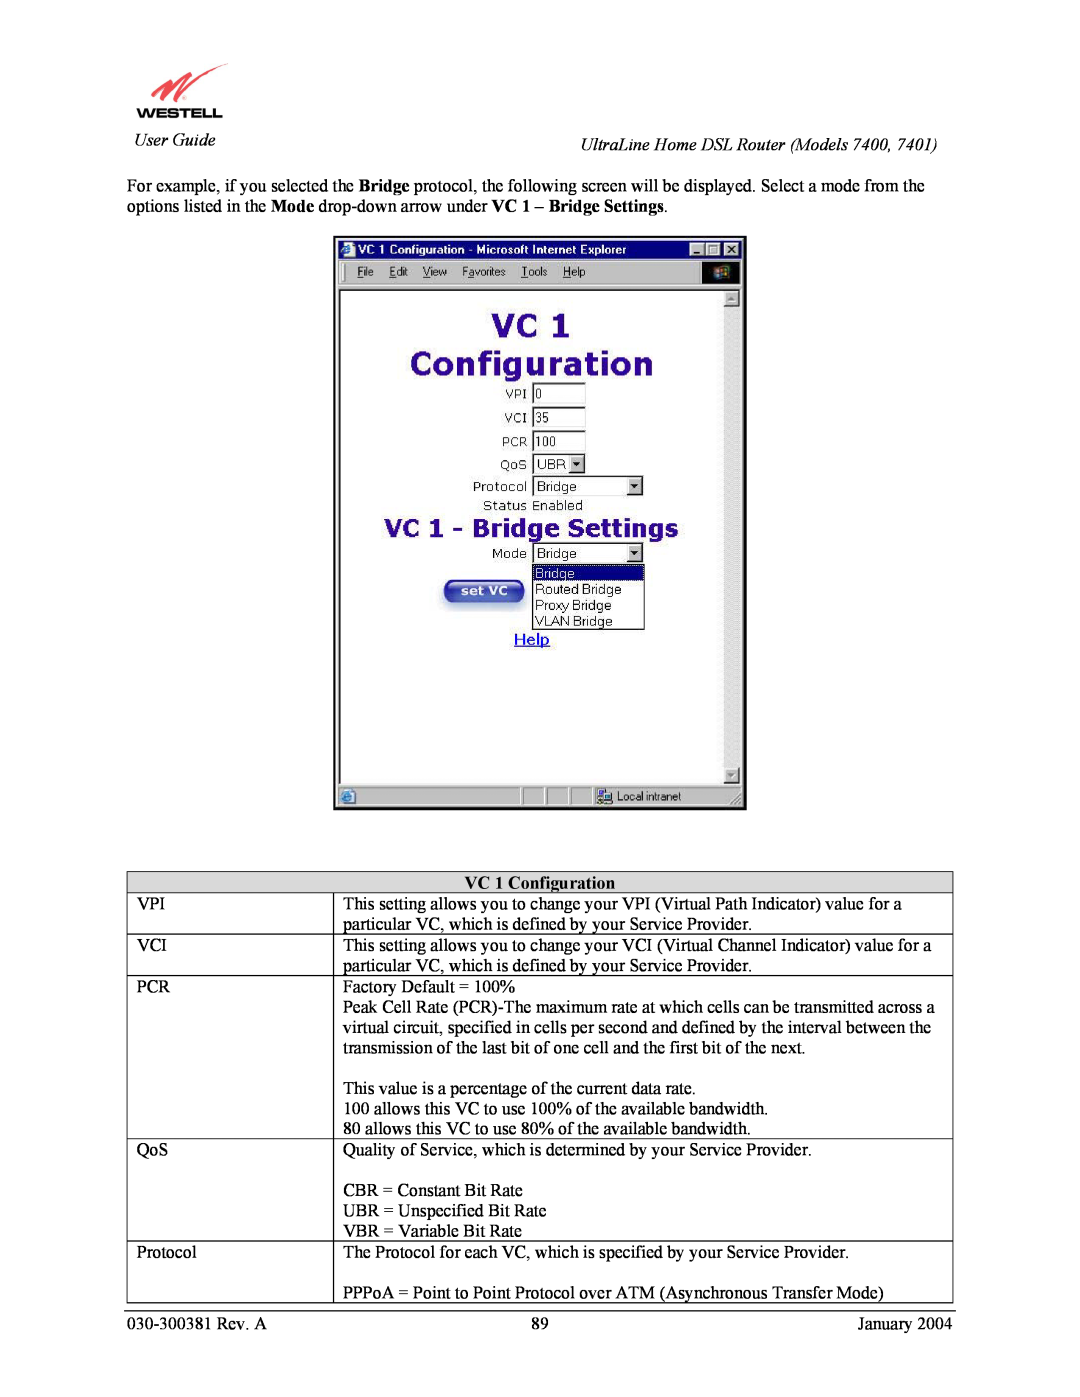 Westell Technologies 7400, 7401 manual VC 1 Configuration 